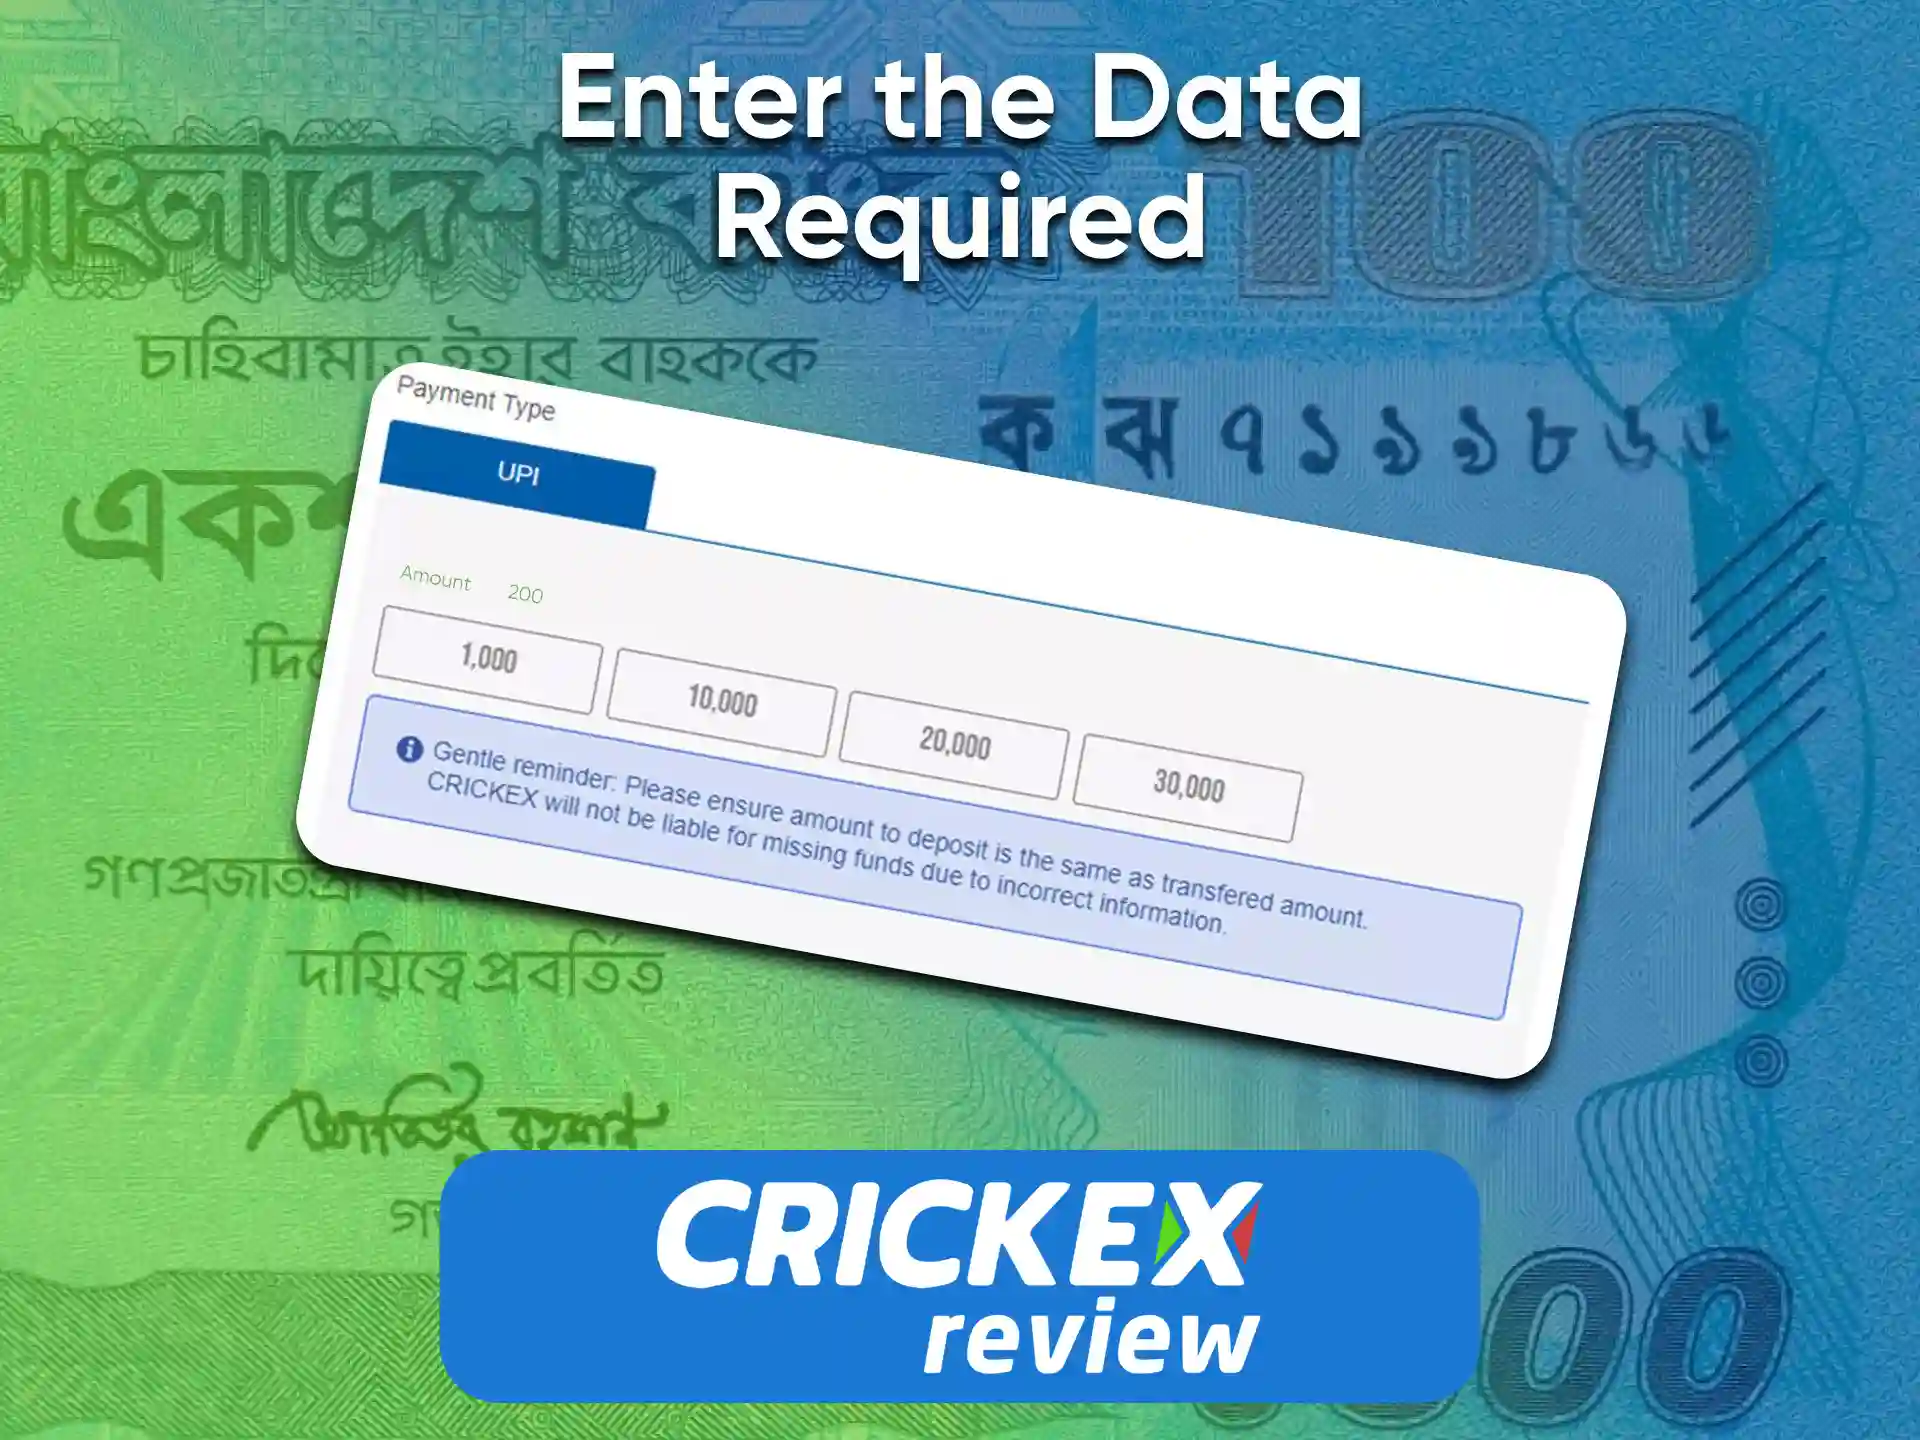 Specify the amount of Crickex account replenishment and personal data.